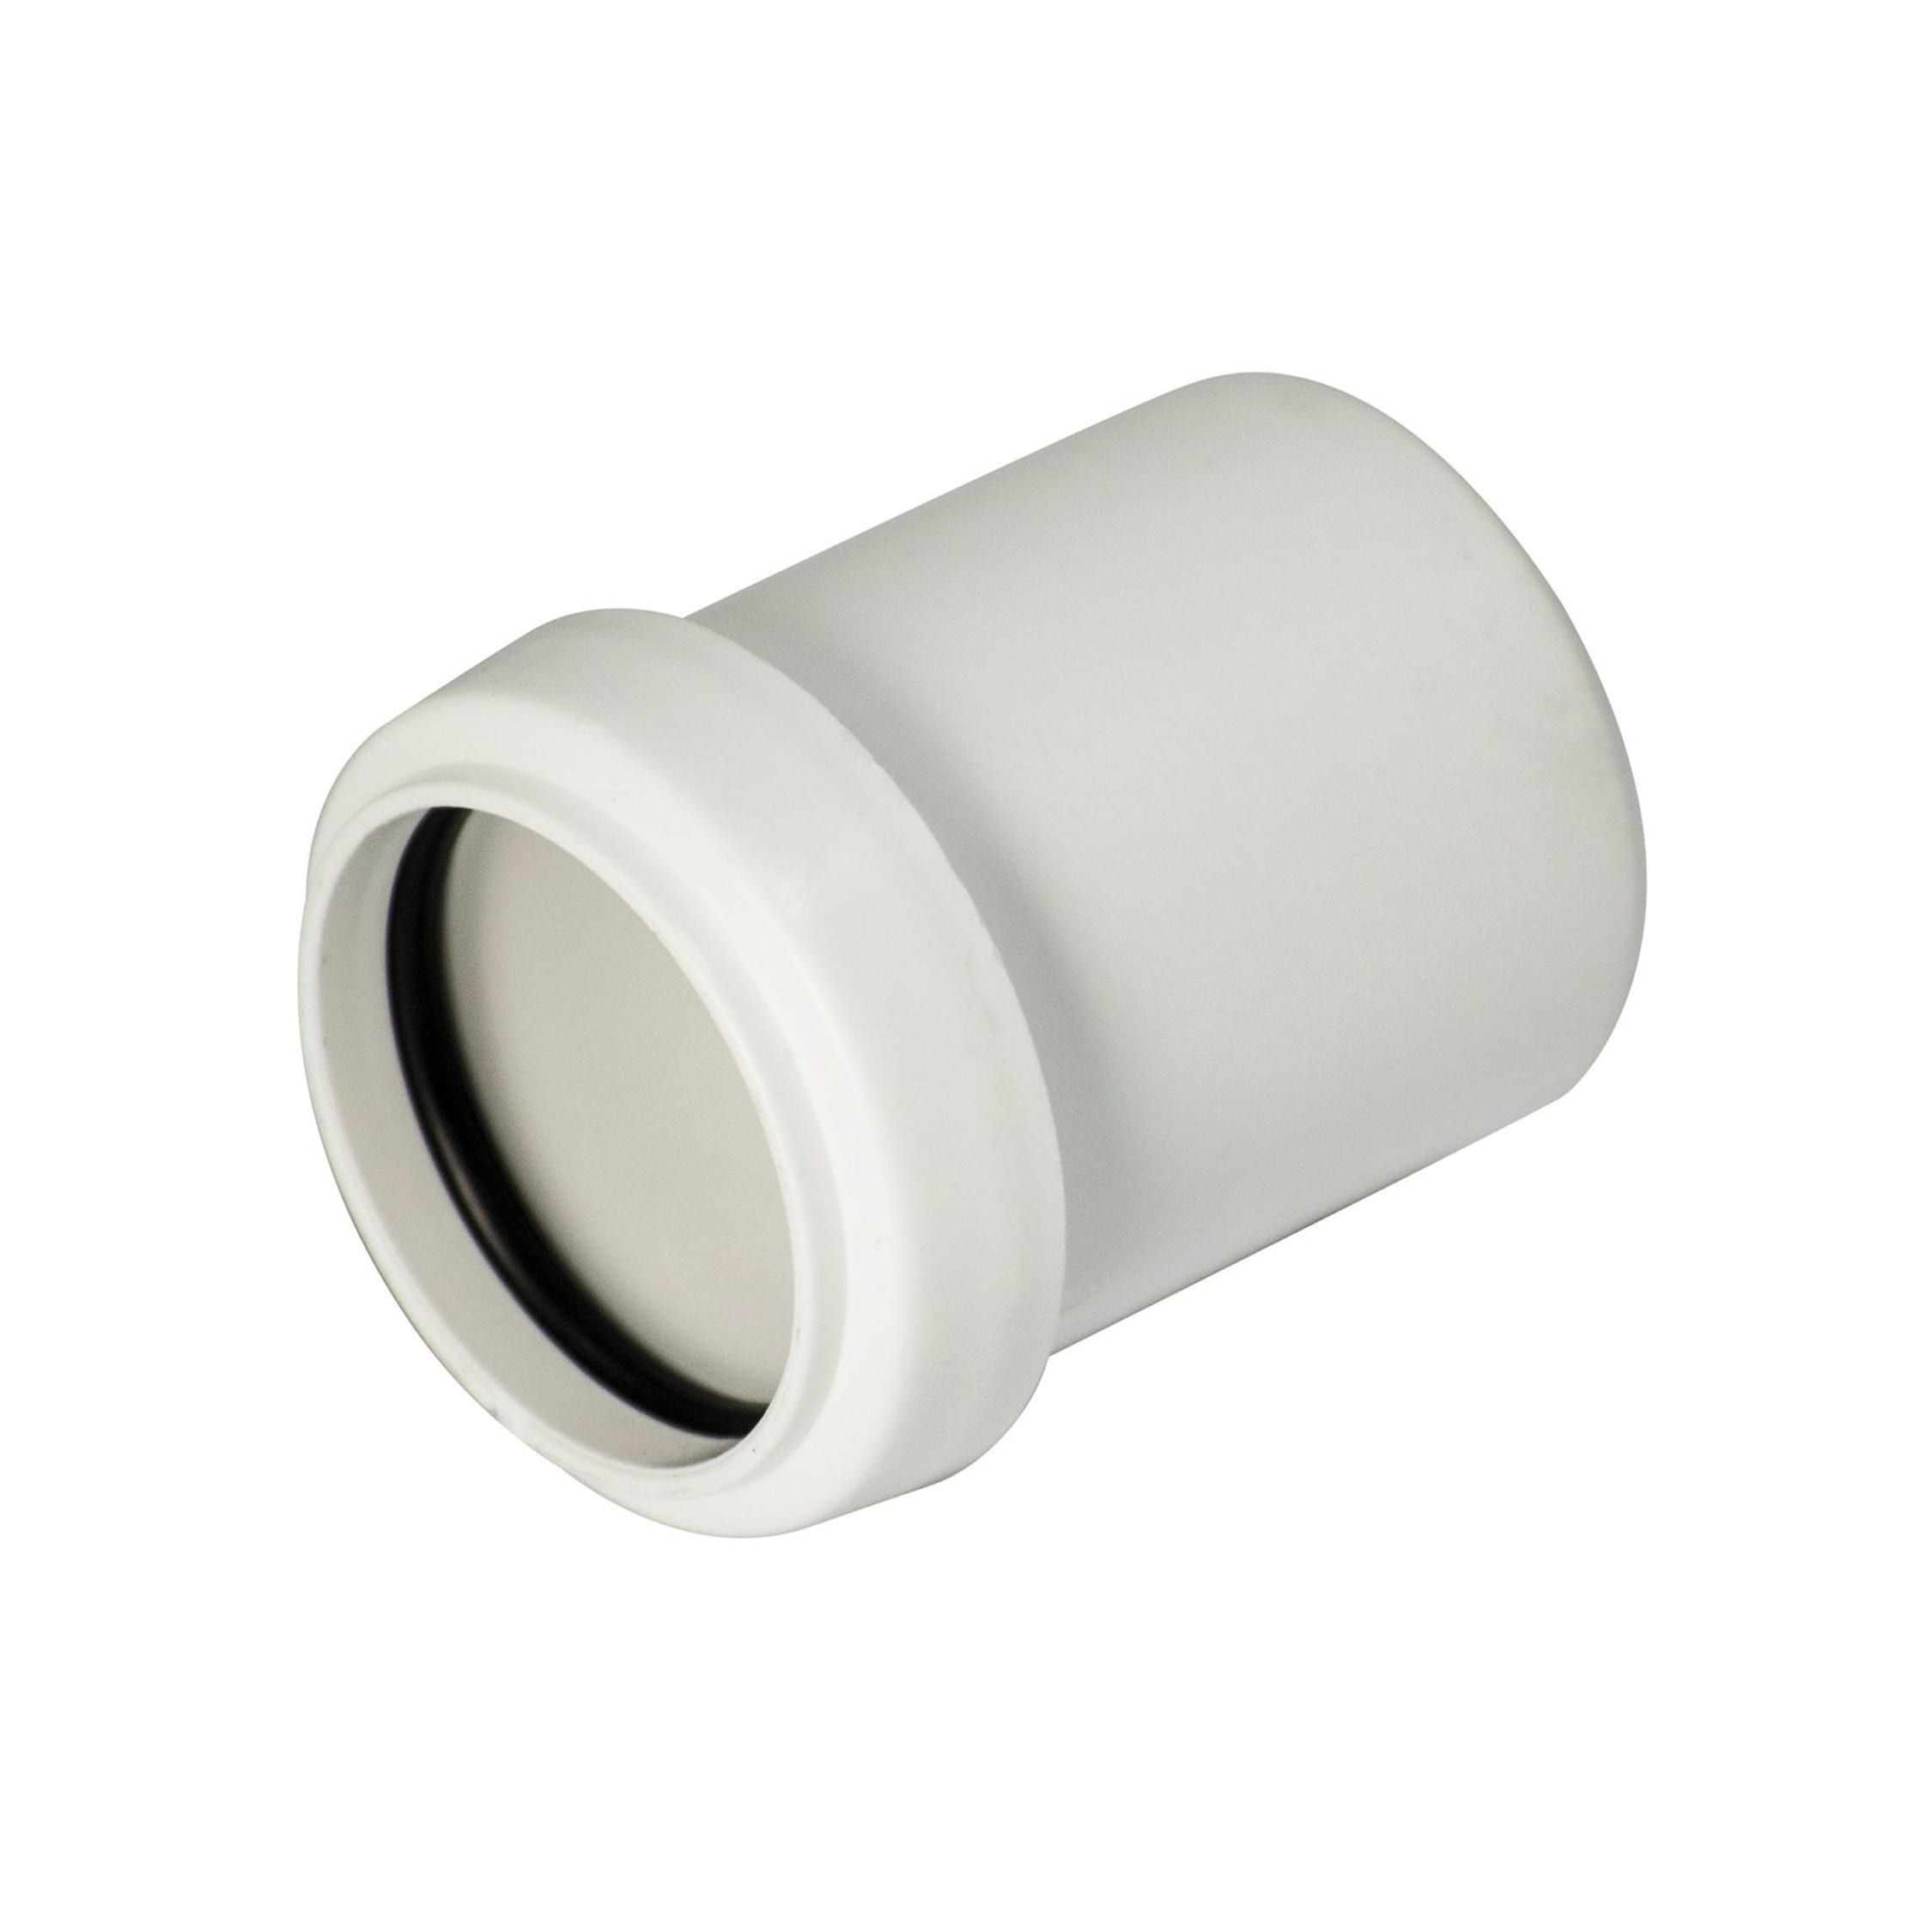 White PACK OF 2 Pushfit 40mm x 32mm Waste Pipe Reducer 